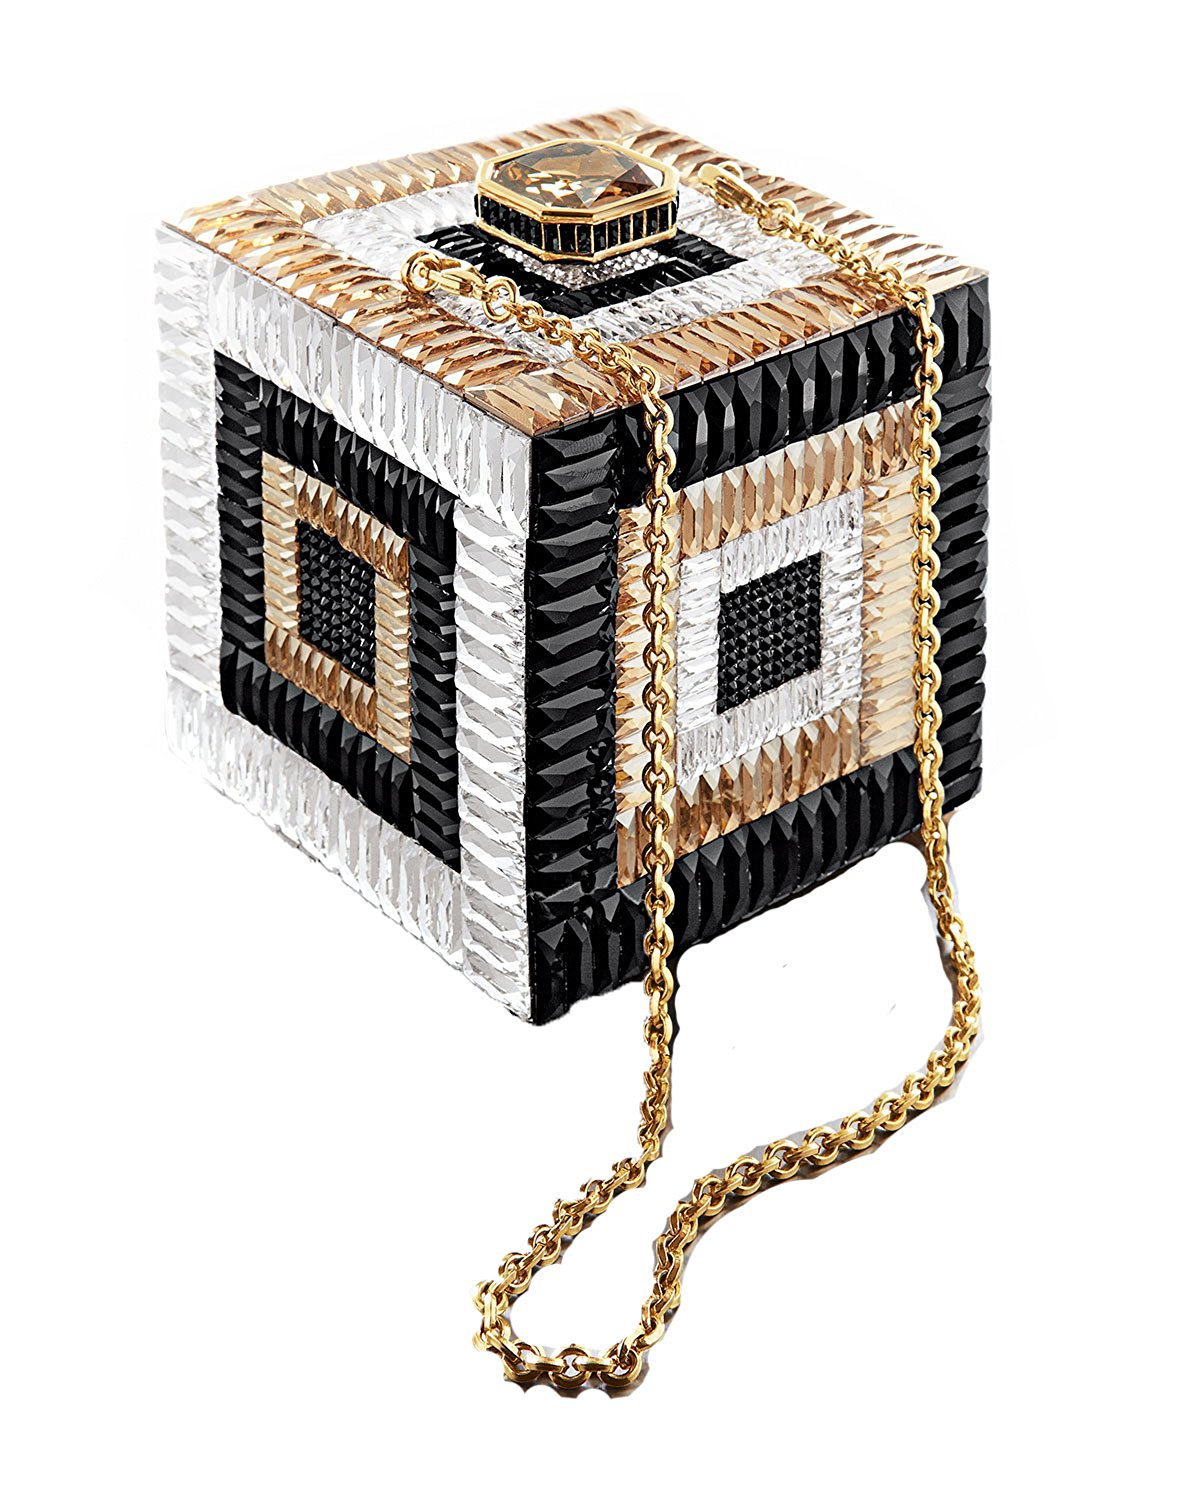 The same price as a really expensive piece of jewelry, this is a keeper for generations! Judith Leiber Couture Cube Be Square Crystal Clutch, $3,200 @amazon.com